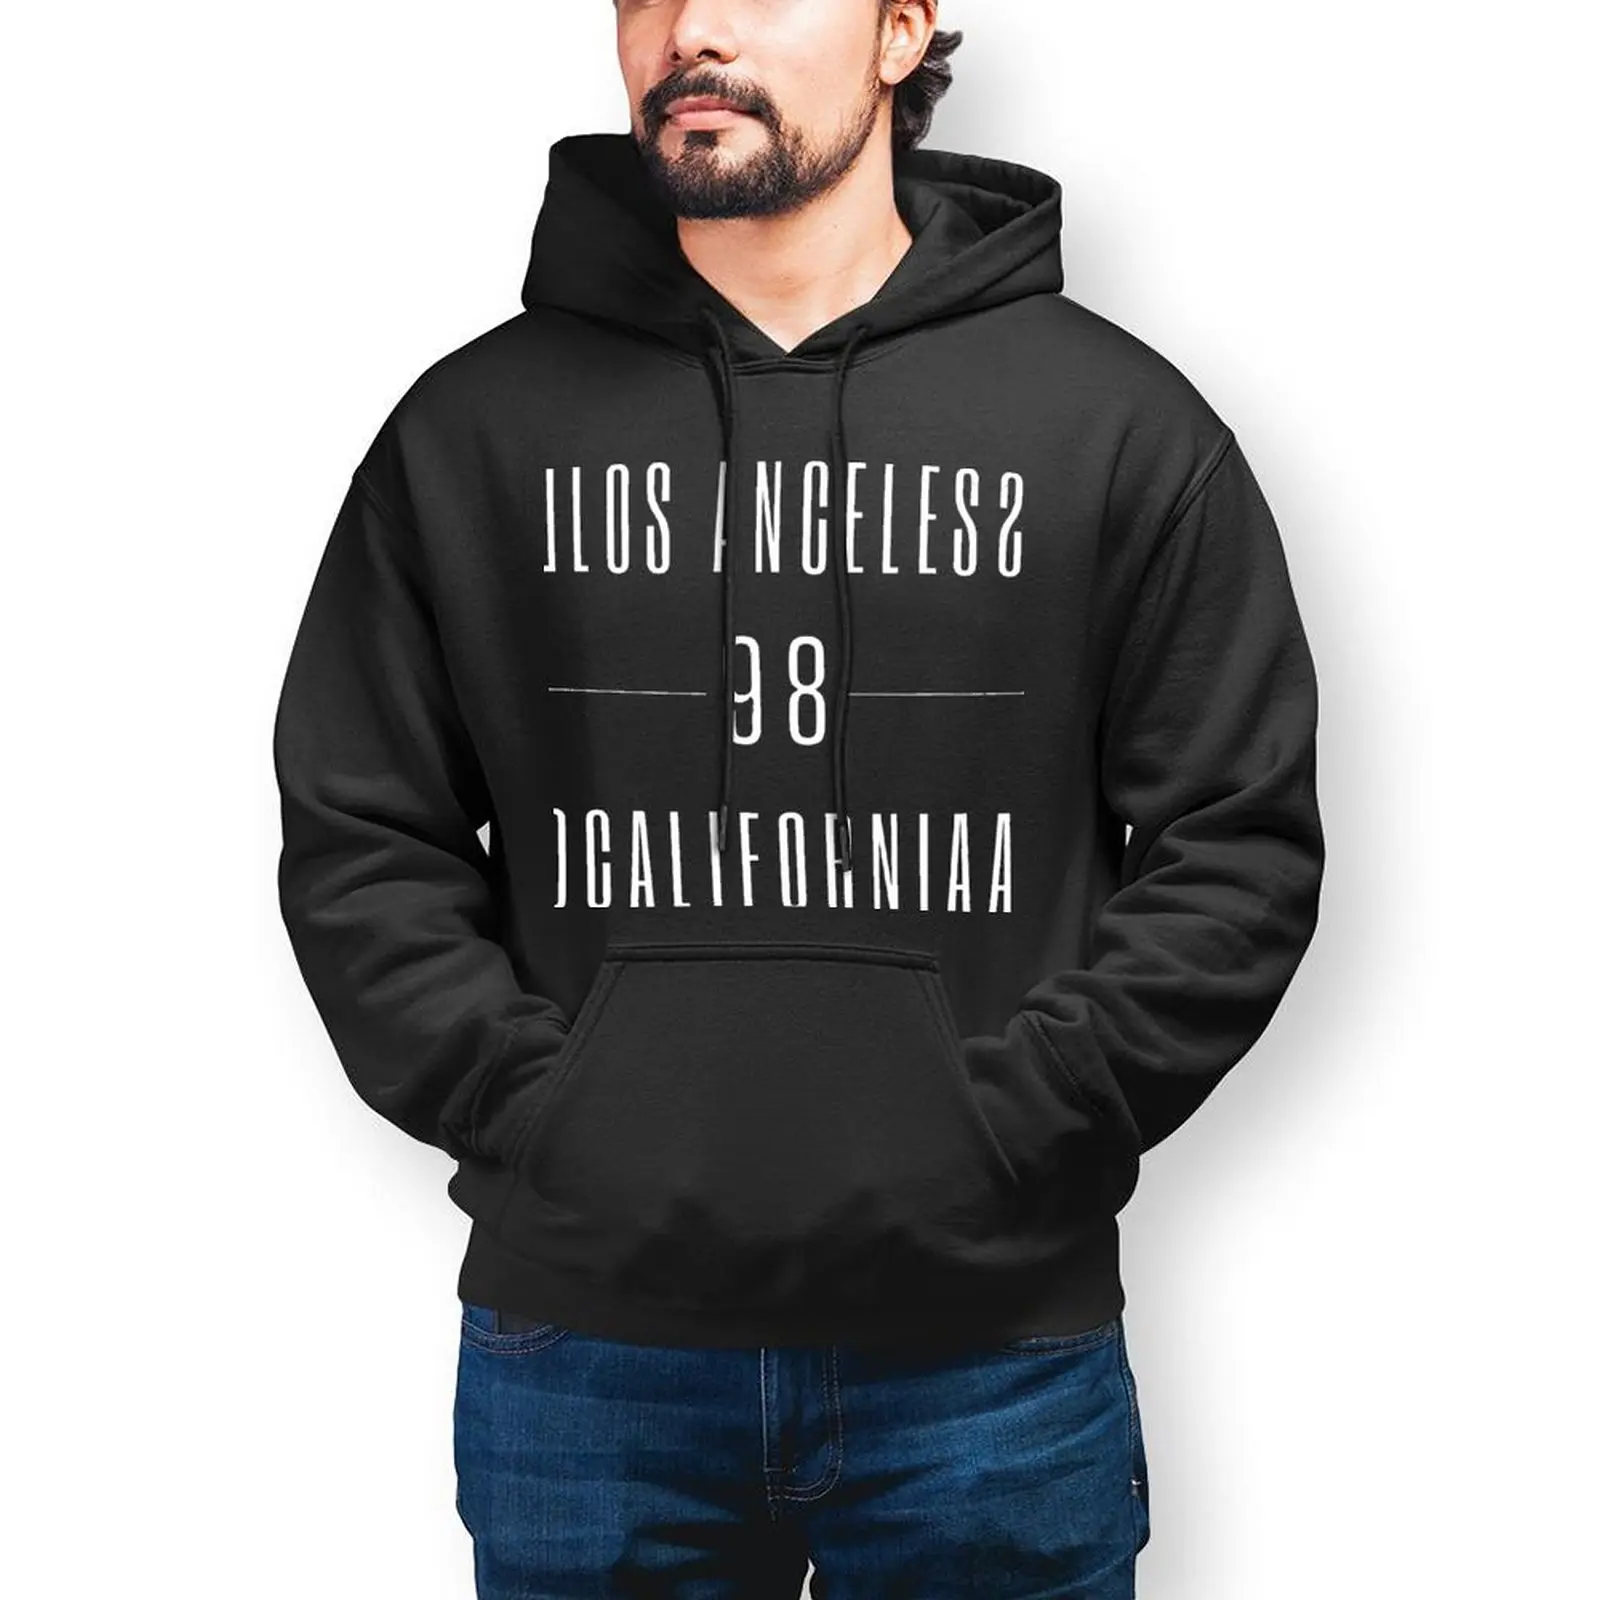 

Los Angeles 98 Casual Hoodies California Funny Cotton Sweatshirts Spring Long Sleeve Outerwear Oversized Hoodie Birthday Gift